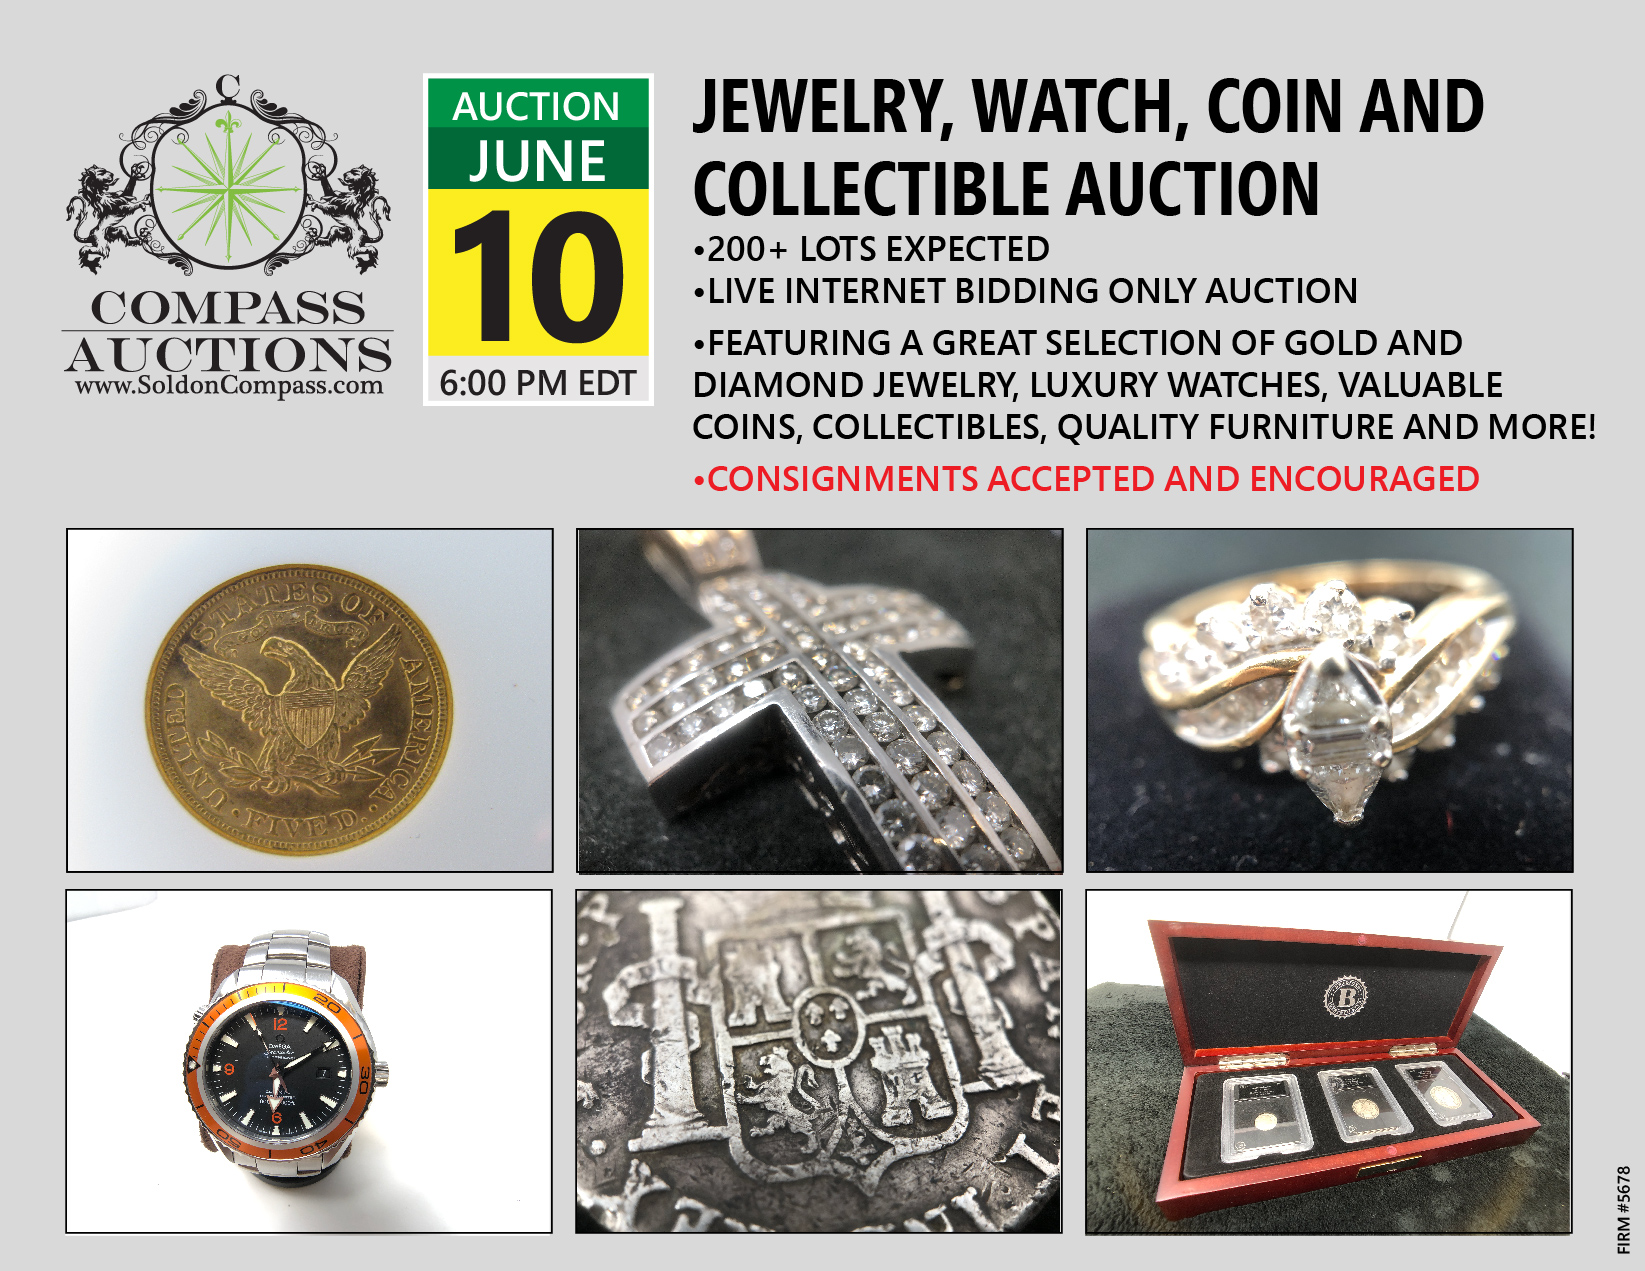 Collectible coin auction jewelry diamond pearl watches online June 2019 Compass Auctions